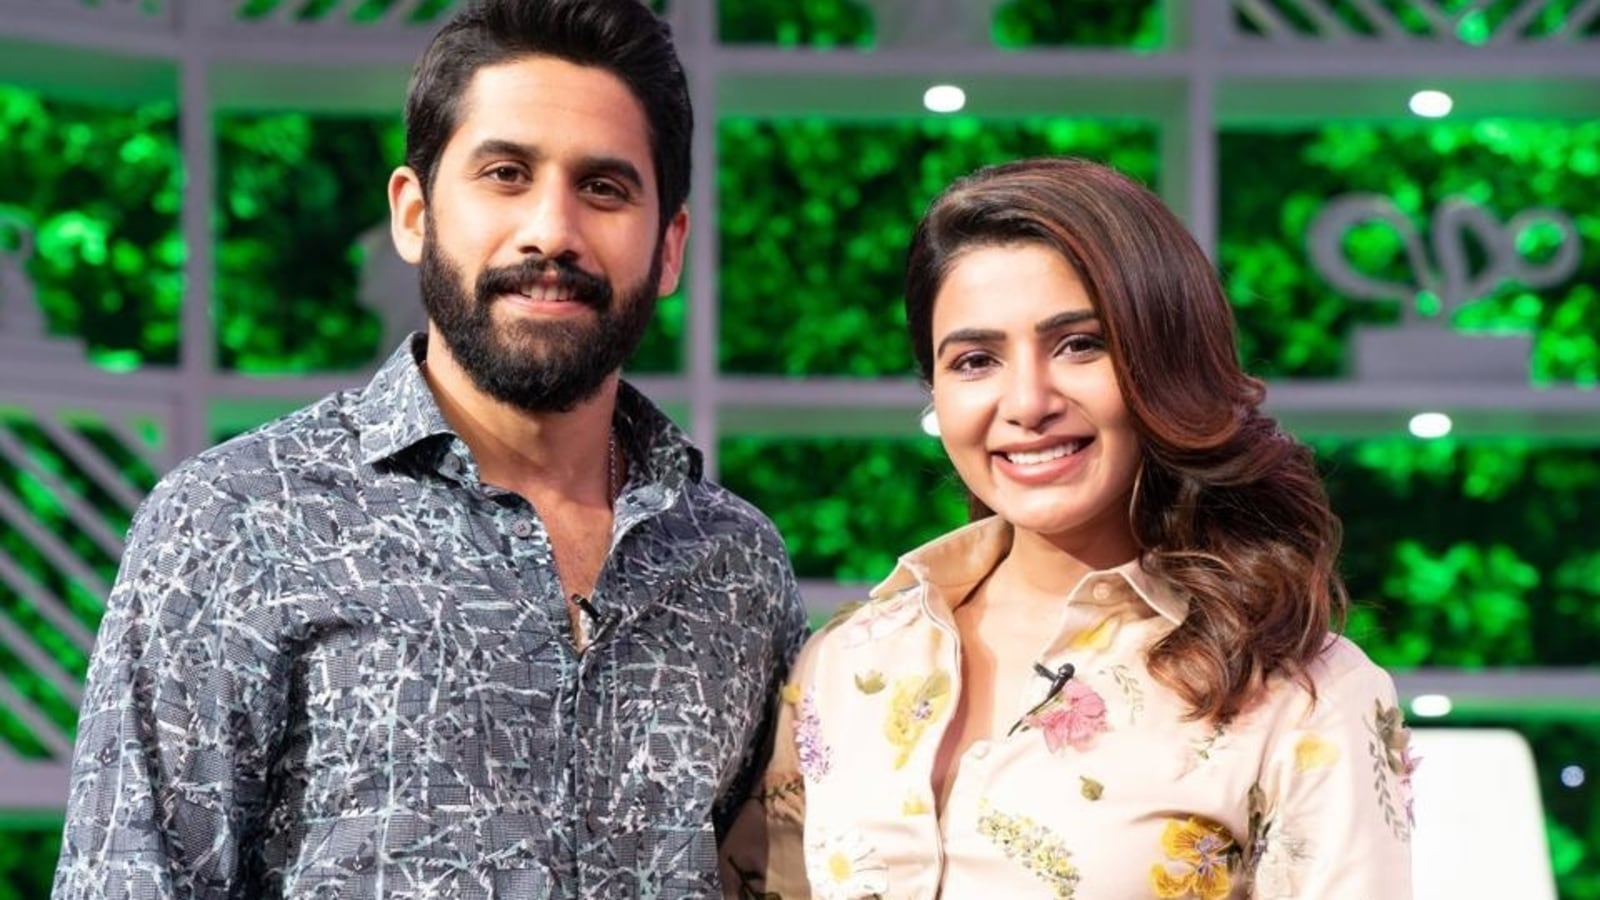 Amid Samantha Akkineni divorce rumours, Naga Chaitanya says it&#39;s &#39;painful&#39;  to see his name being used to promote gossip - Hindustan Times